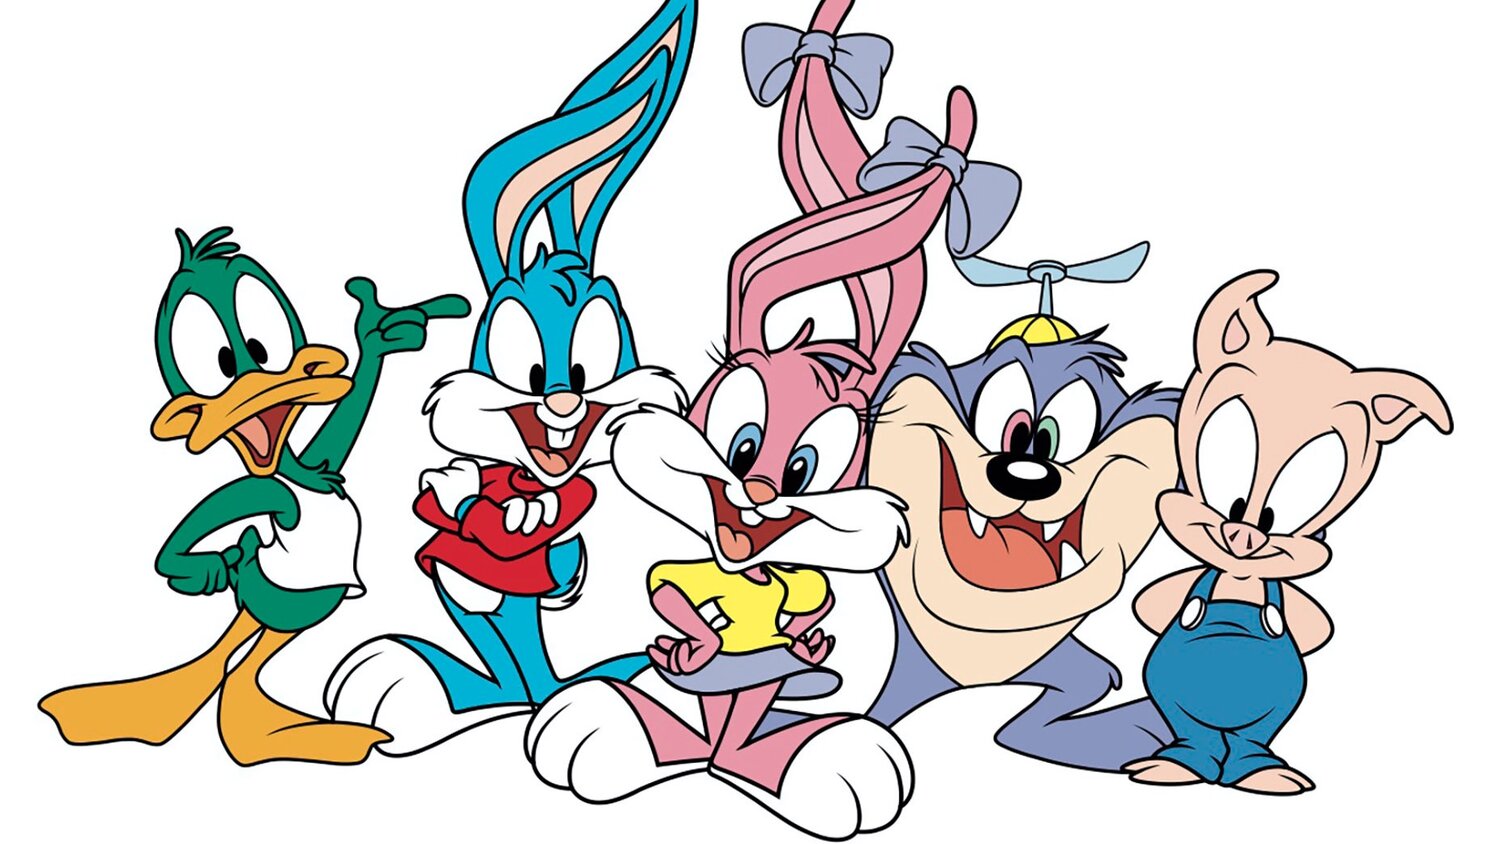 TINY TOONS ADVENTURES Reboot Series Coming to HBO Max.